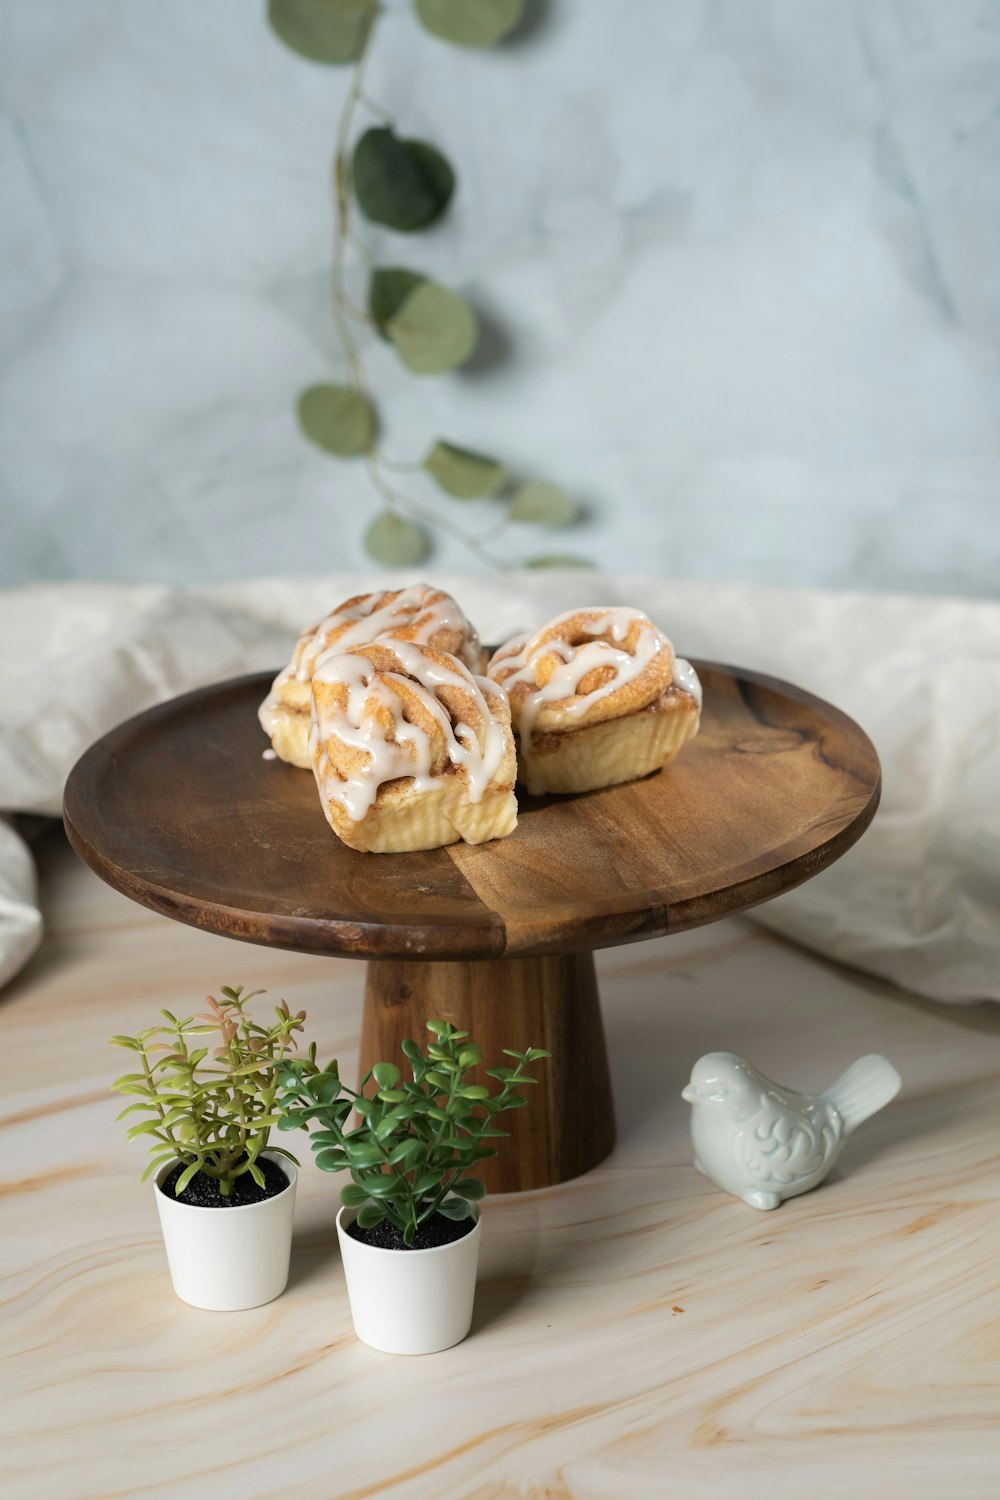 two pastries sitting on a cake stand next to a potted plant